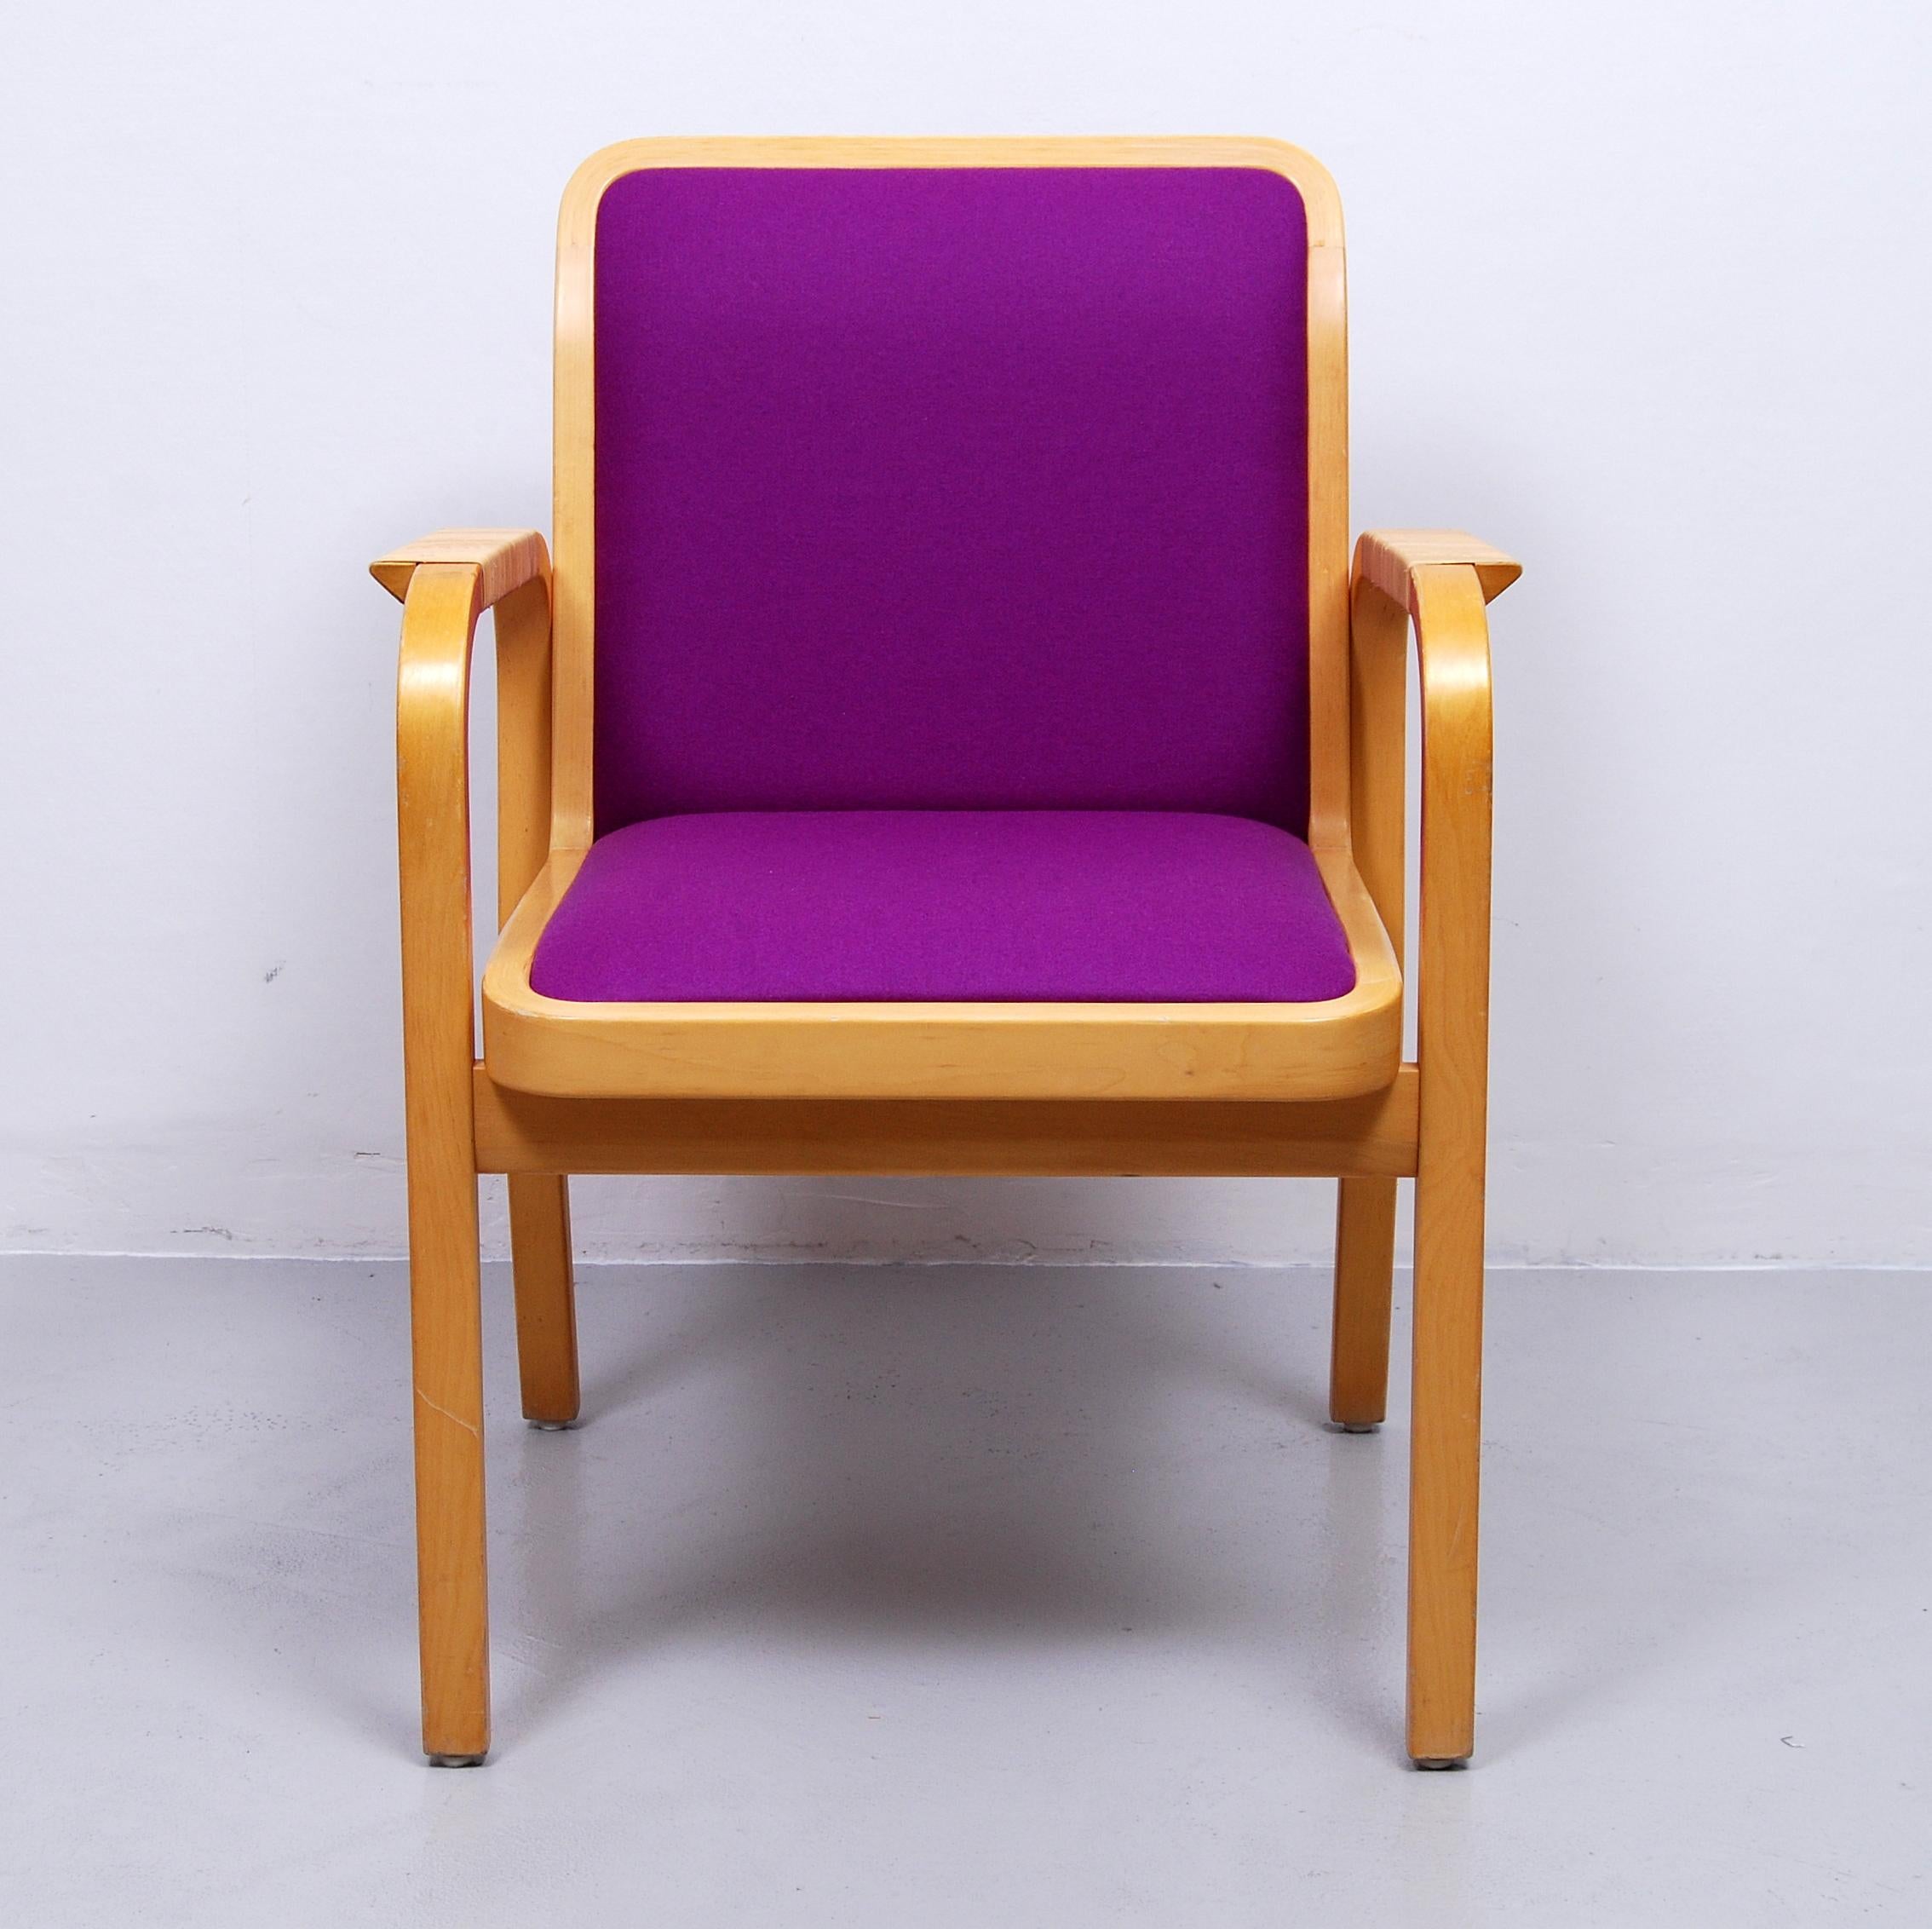 Armchair model 45 designed by Alvar Aalto in 1947 and made by Artek. This chair has been reupholstered with new mauve fabric, armrests are tightly wound in rattan.